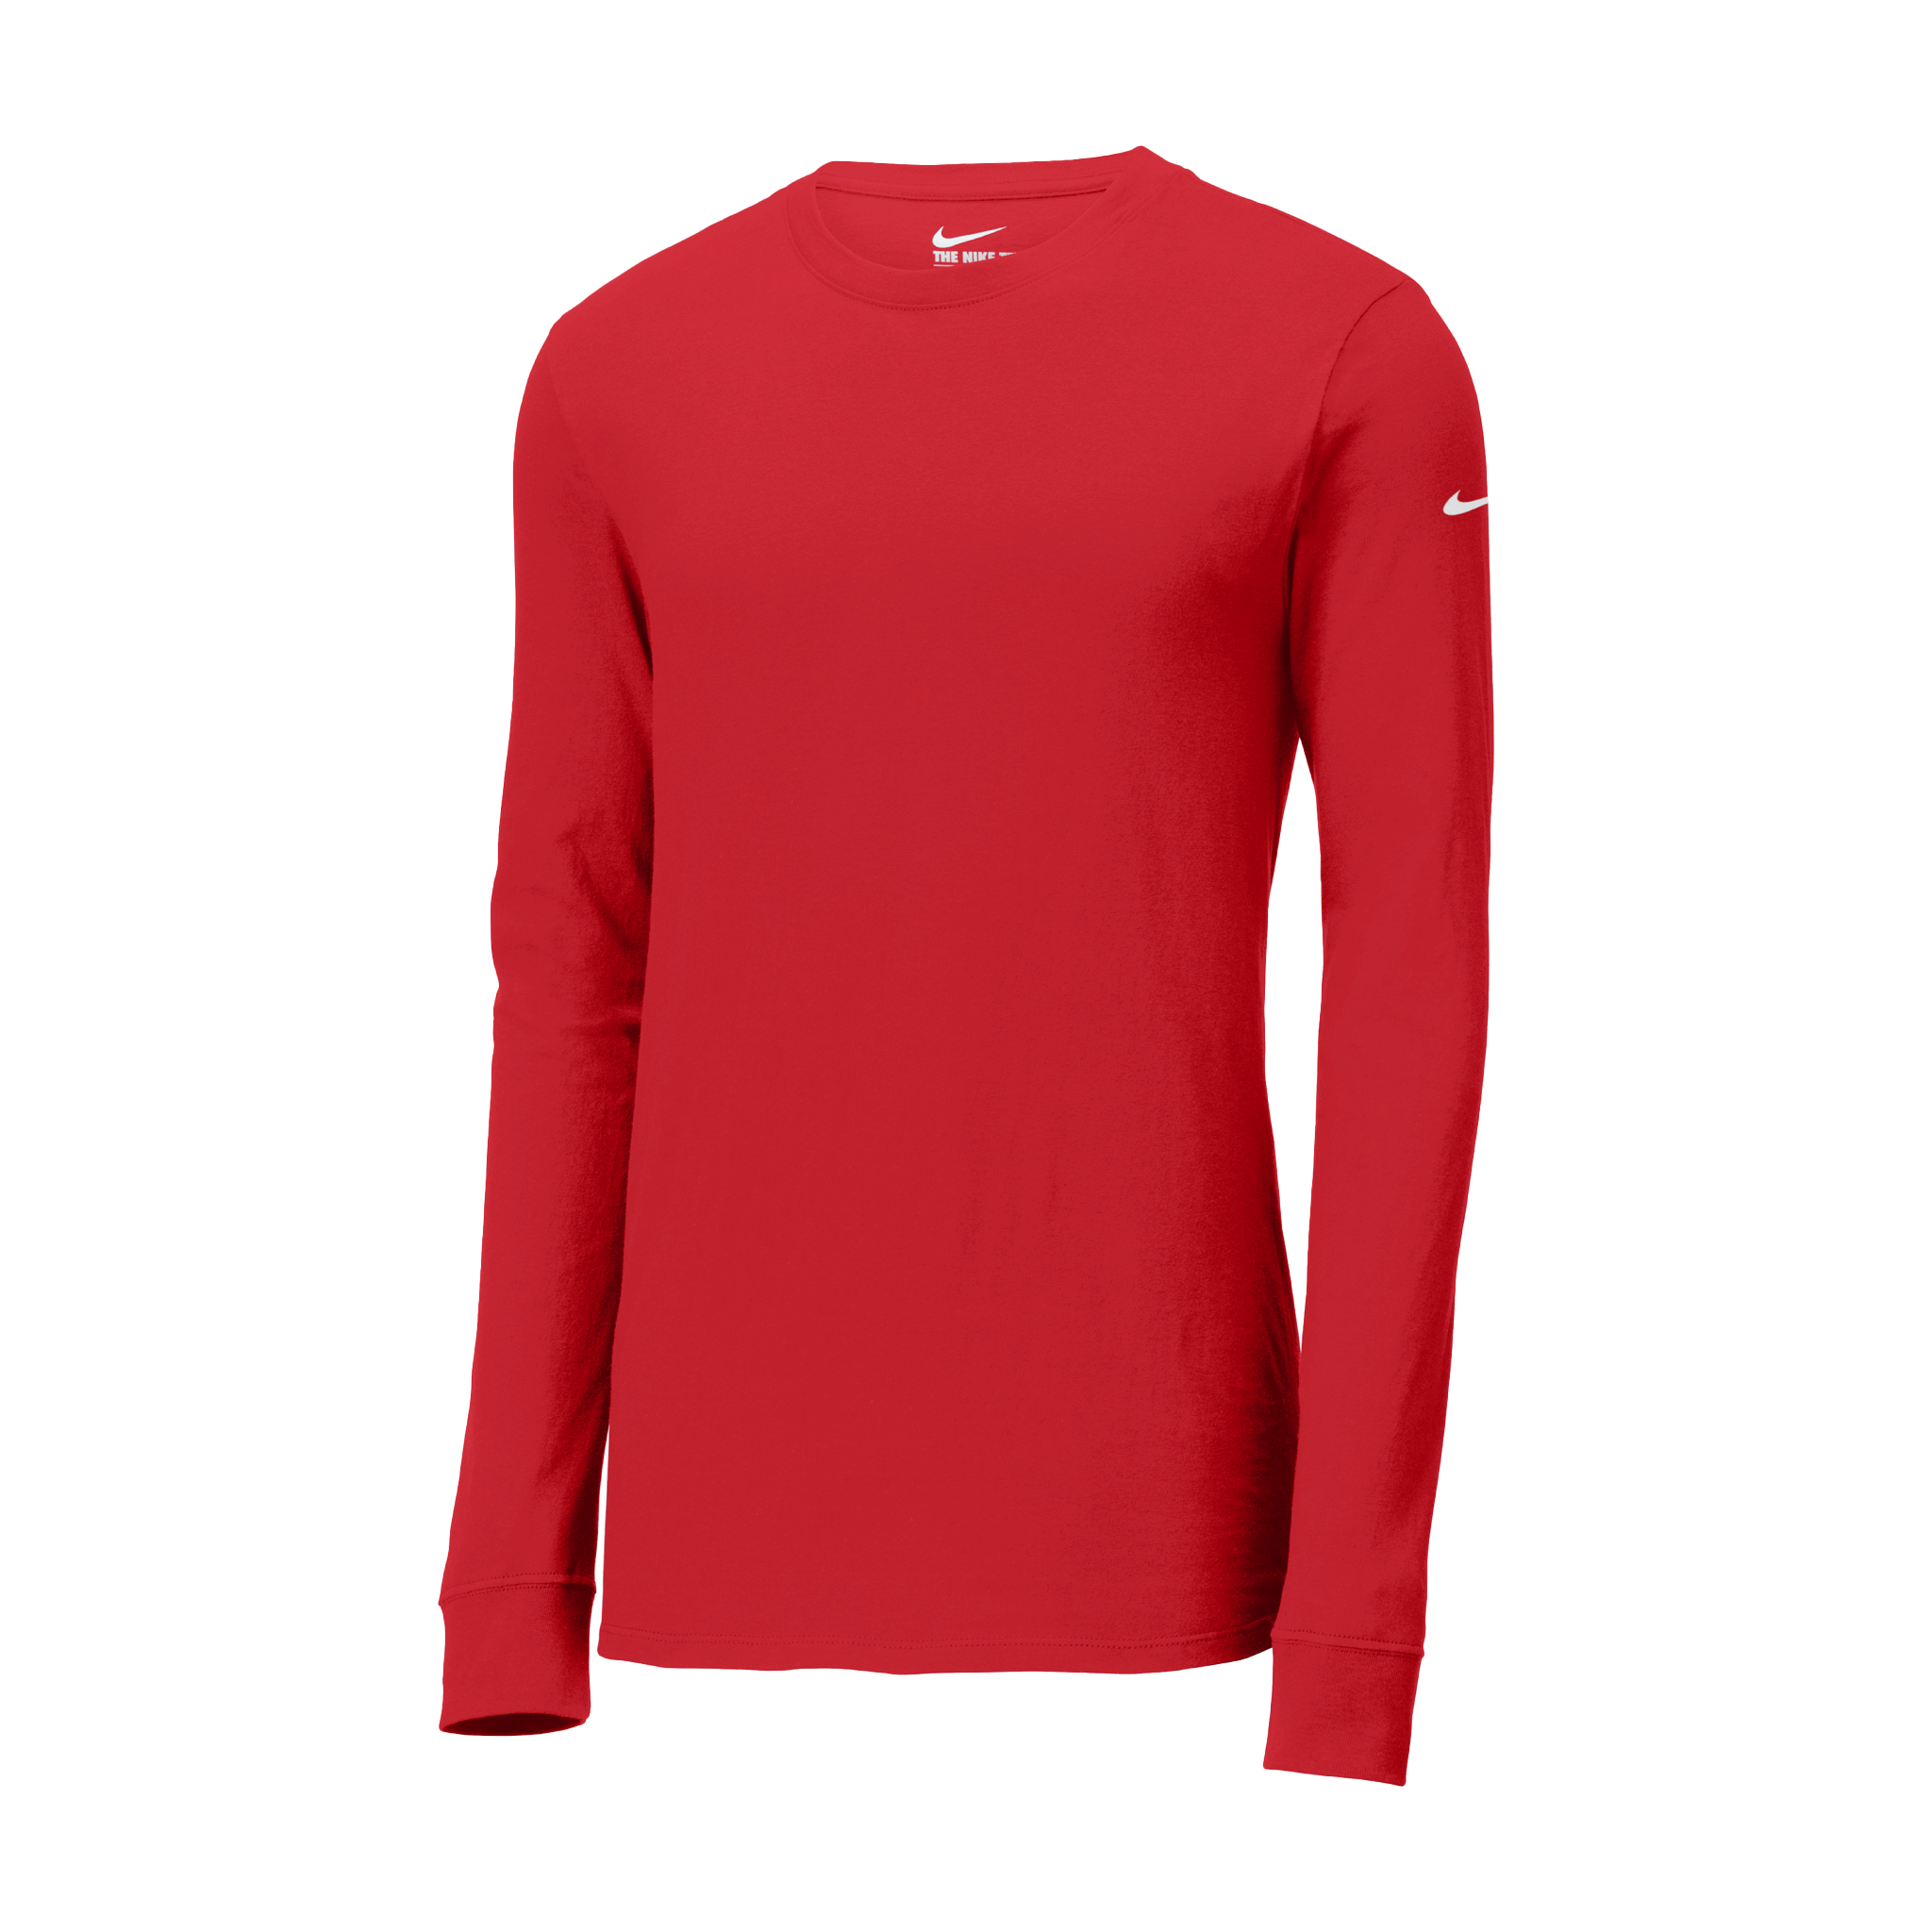 Core Cotton Long Sleeve Tee - Brights